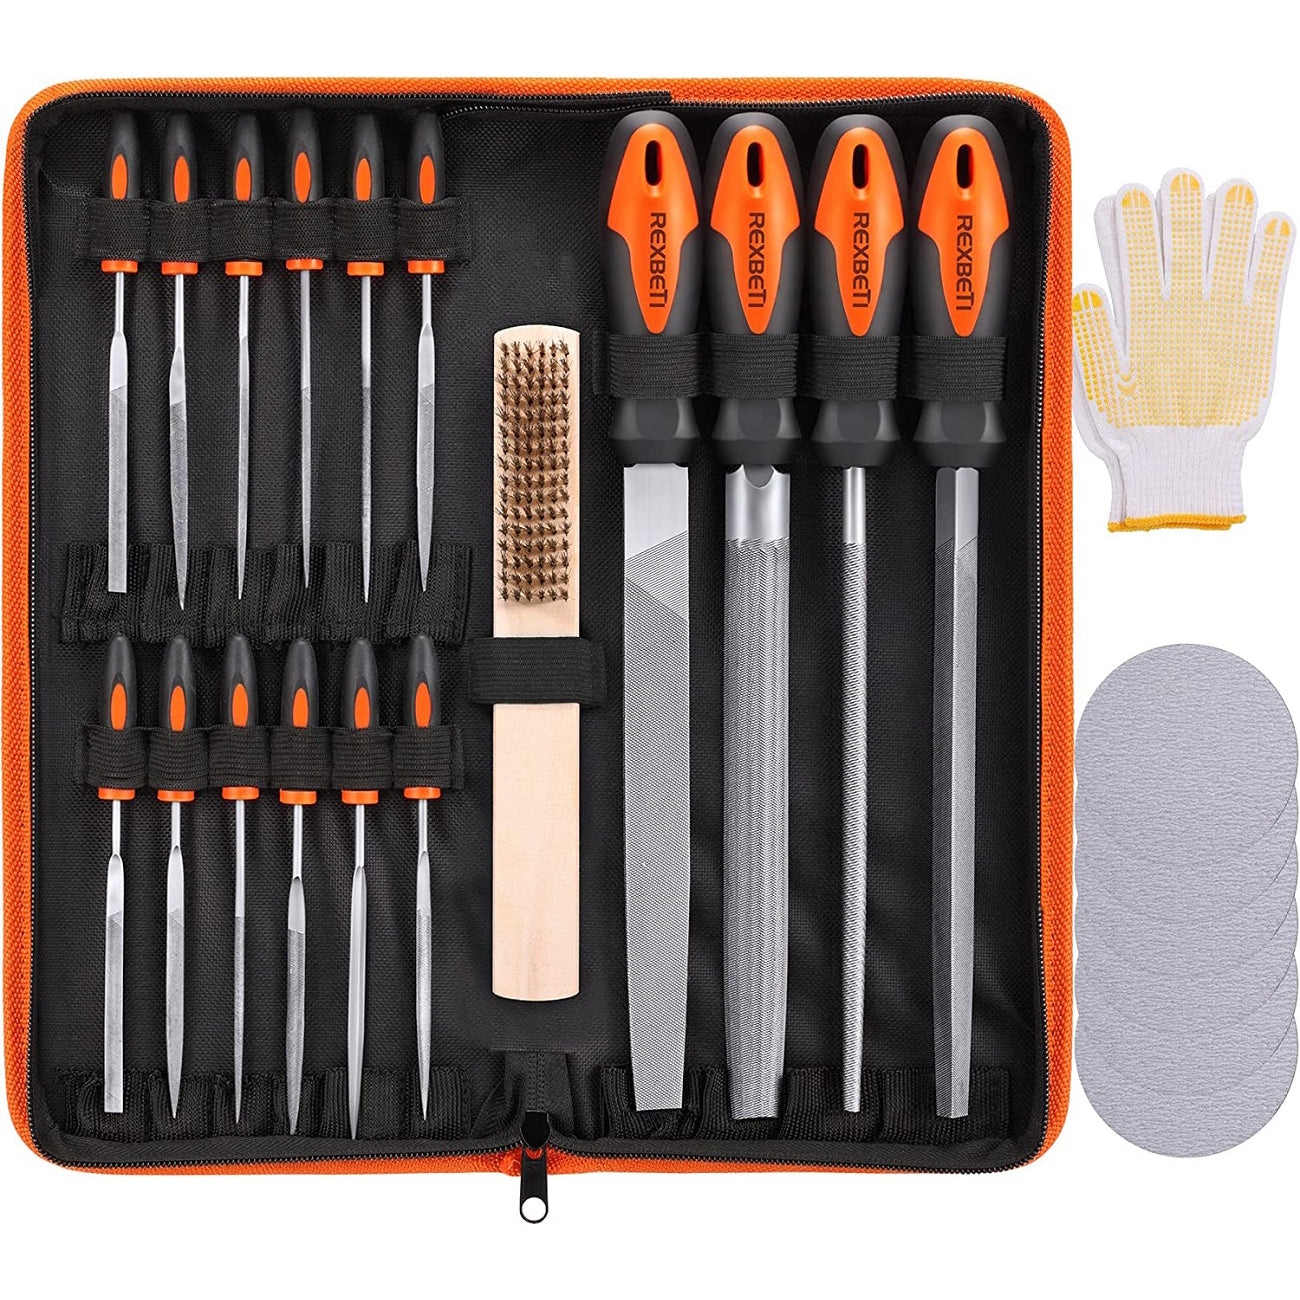 REXBETI 25Pcs Metal File Set, Premium Grade T12 Drop Forged Alloy Steel,  Flat/Triangle/Half-round/Round Large File and 12pcs Needle Files with Carry